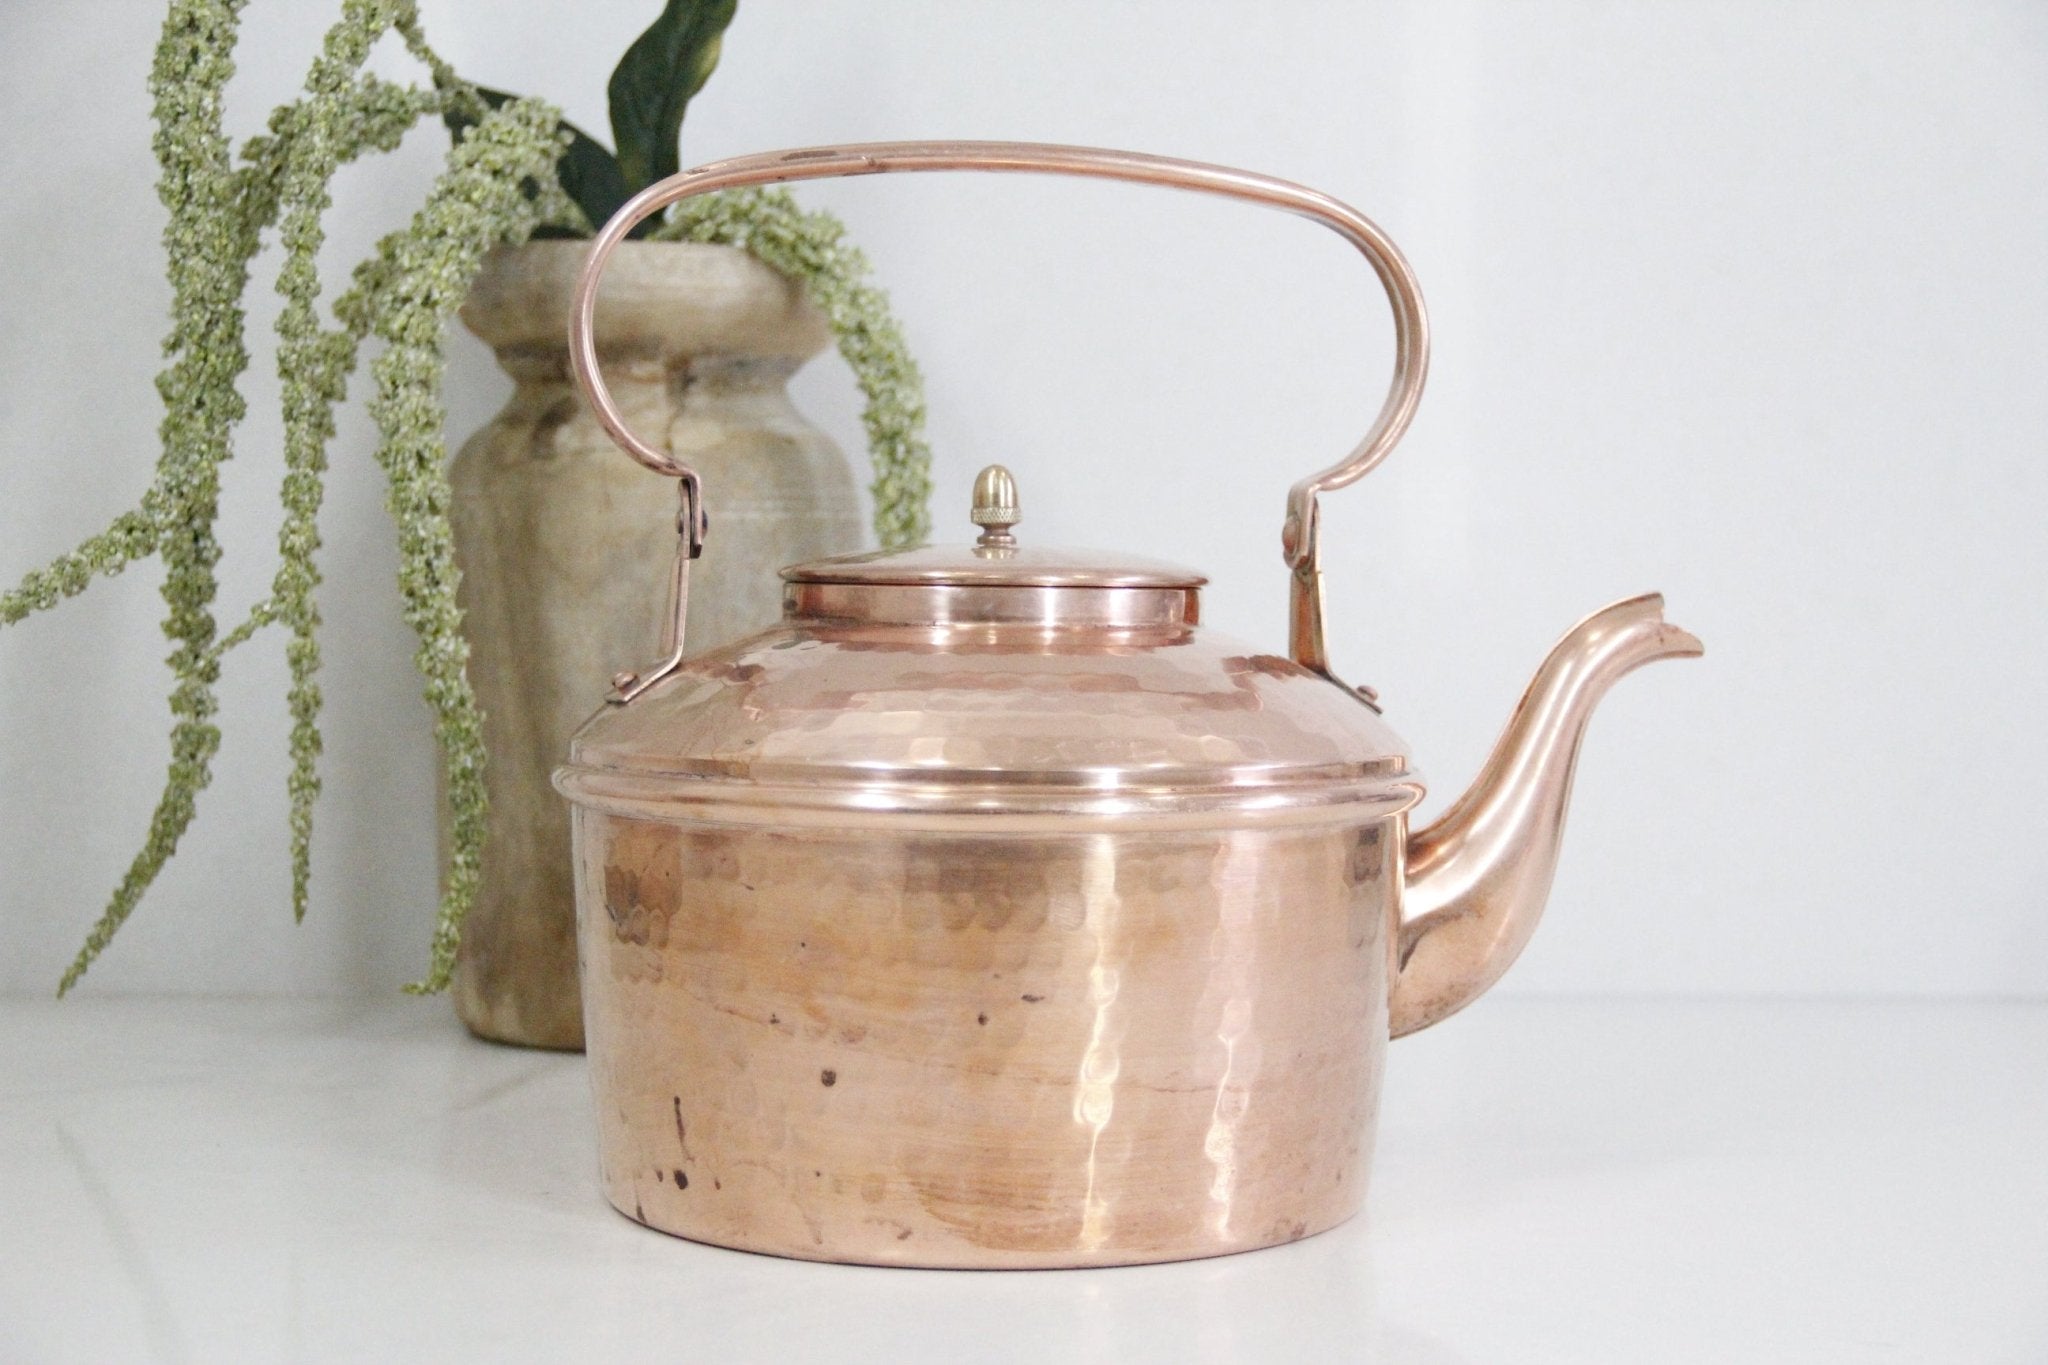 French Copper Kettle 1800s - Debra Hall Lifestyle